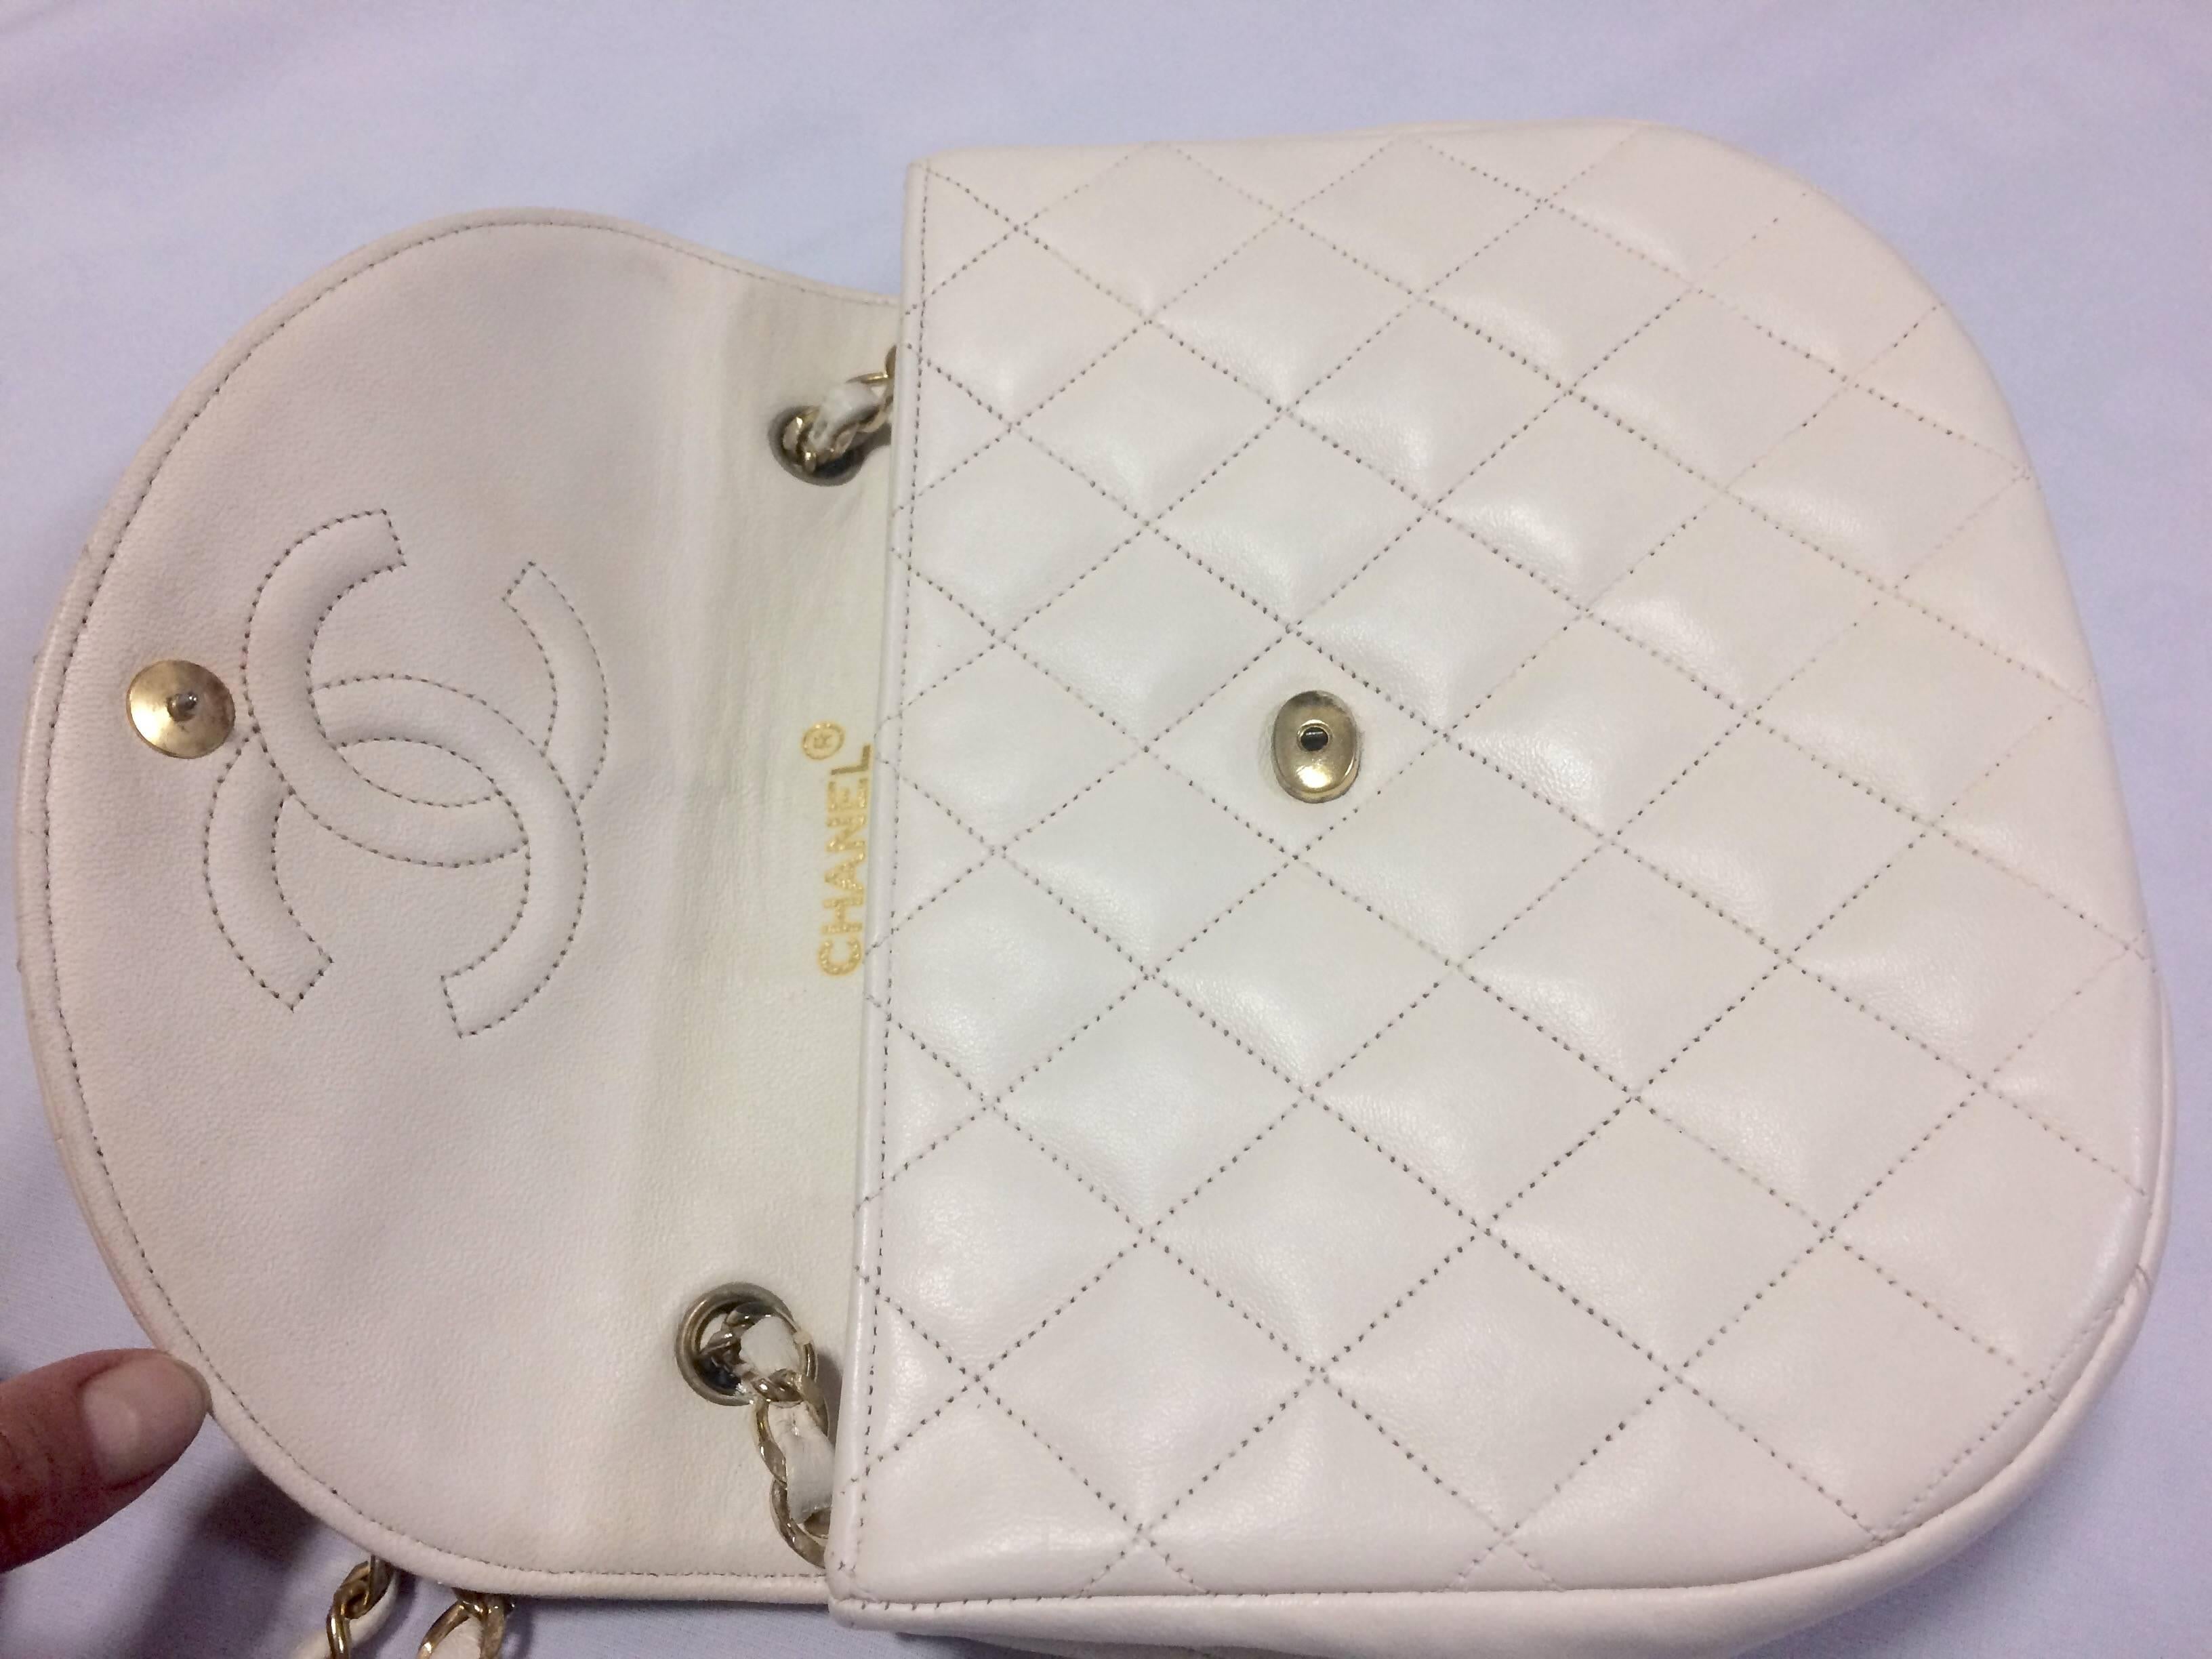 Women's Vintage CHANEL ivory white lambskin 2.55 chain shoulder bag with gold CC motif.